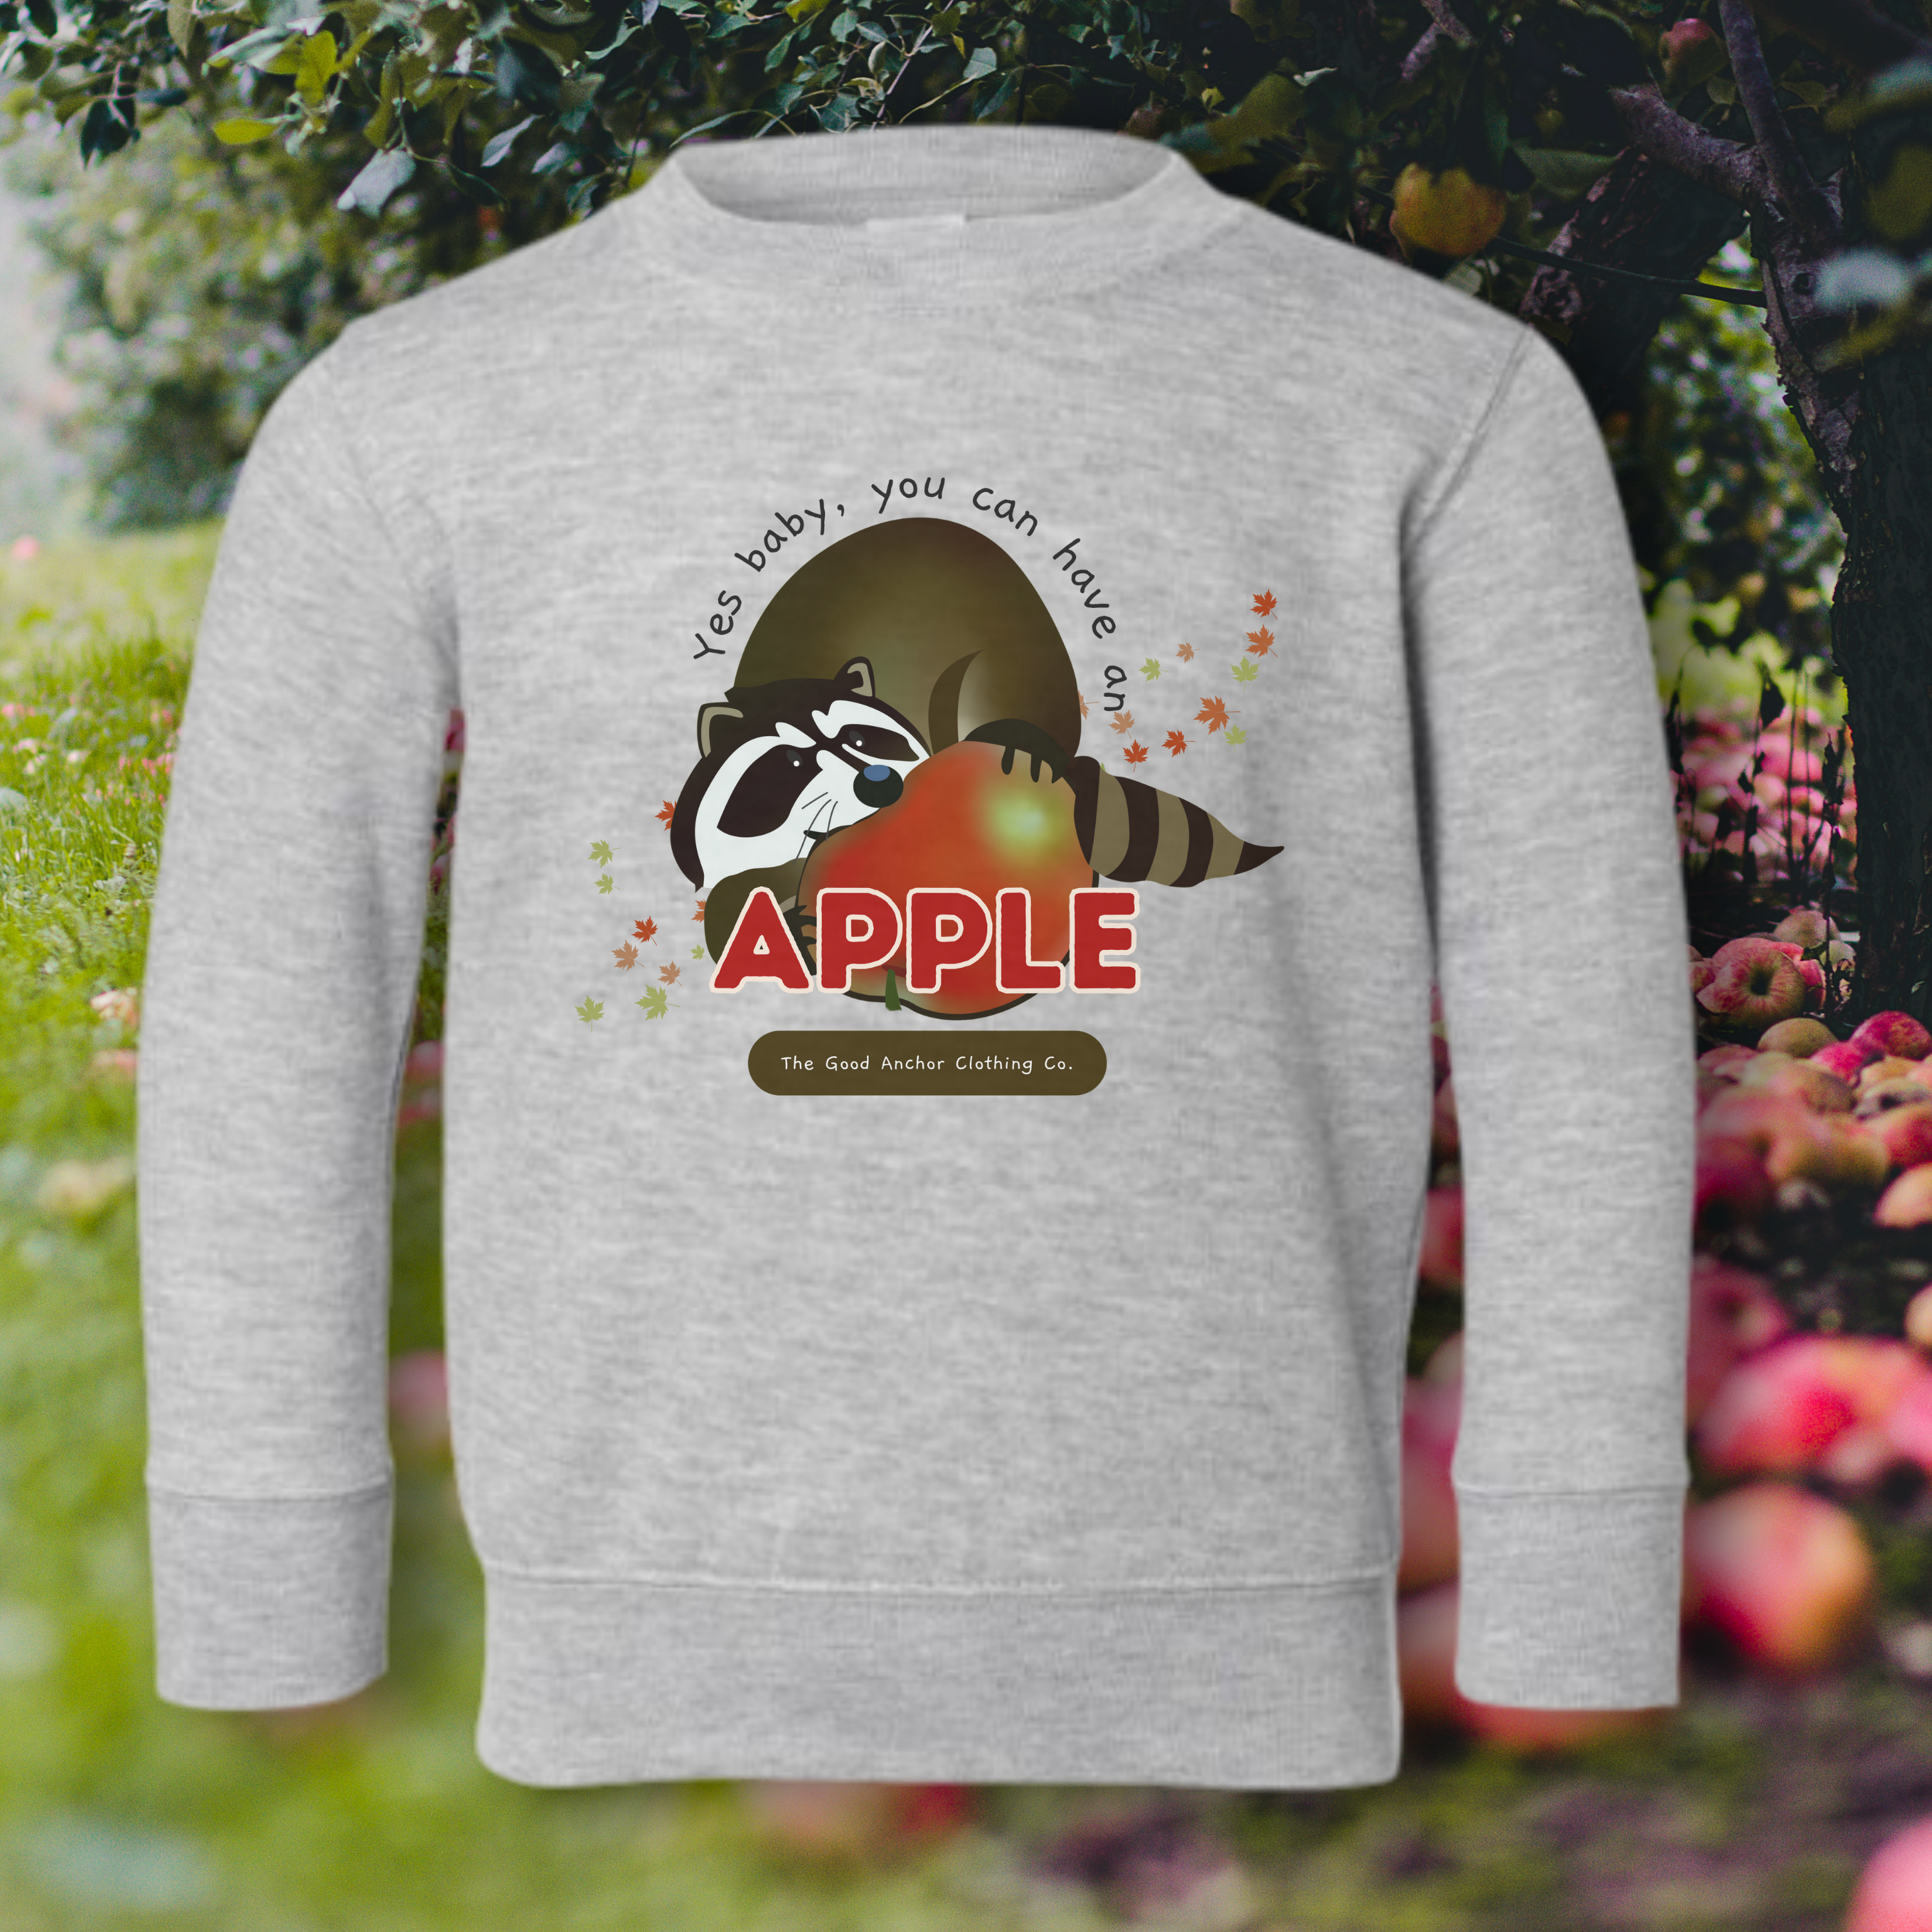 Yes Baby, You Can Have an Apple Fleece Crew (Toddler / Youth / Adult)